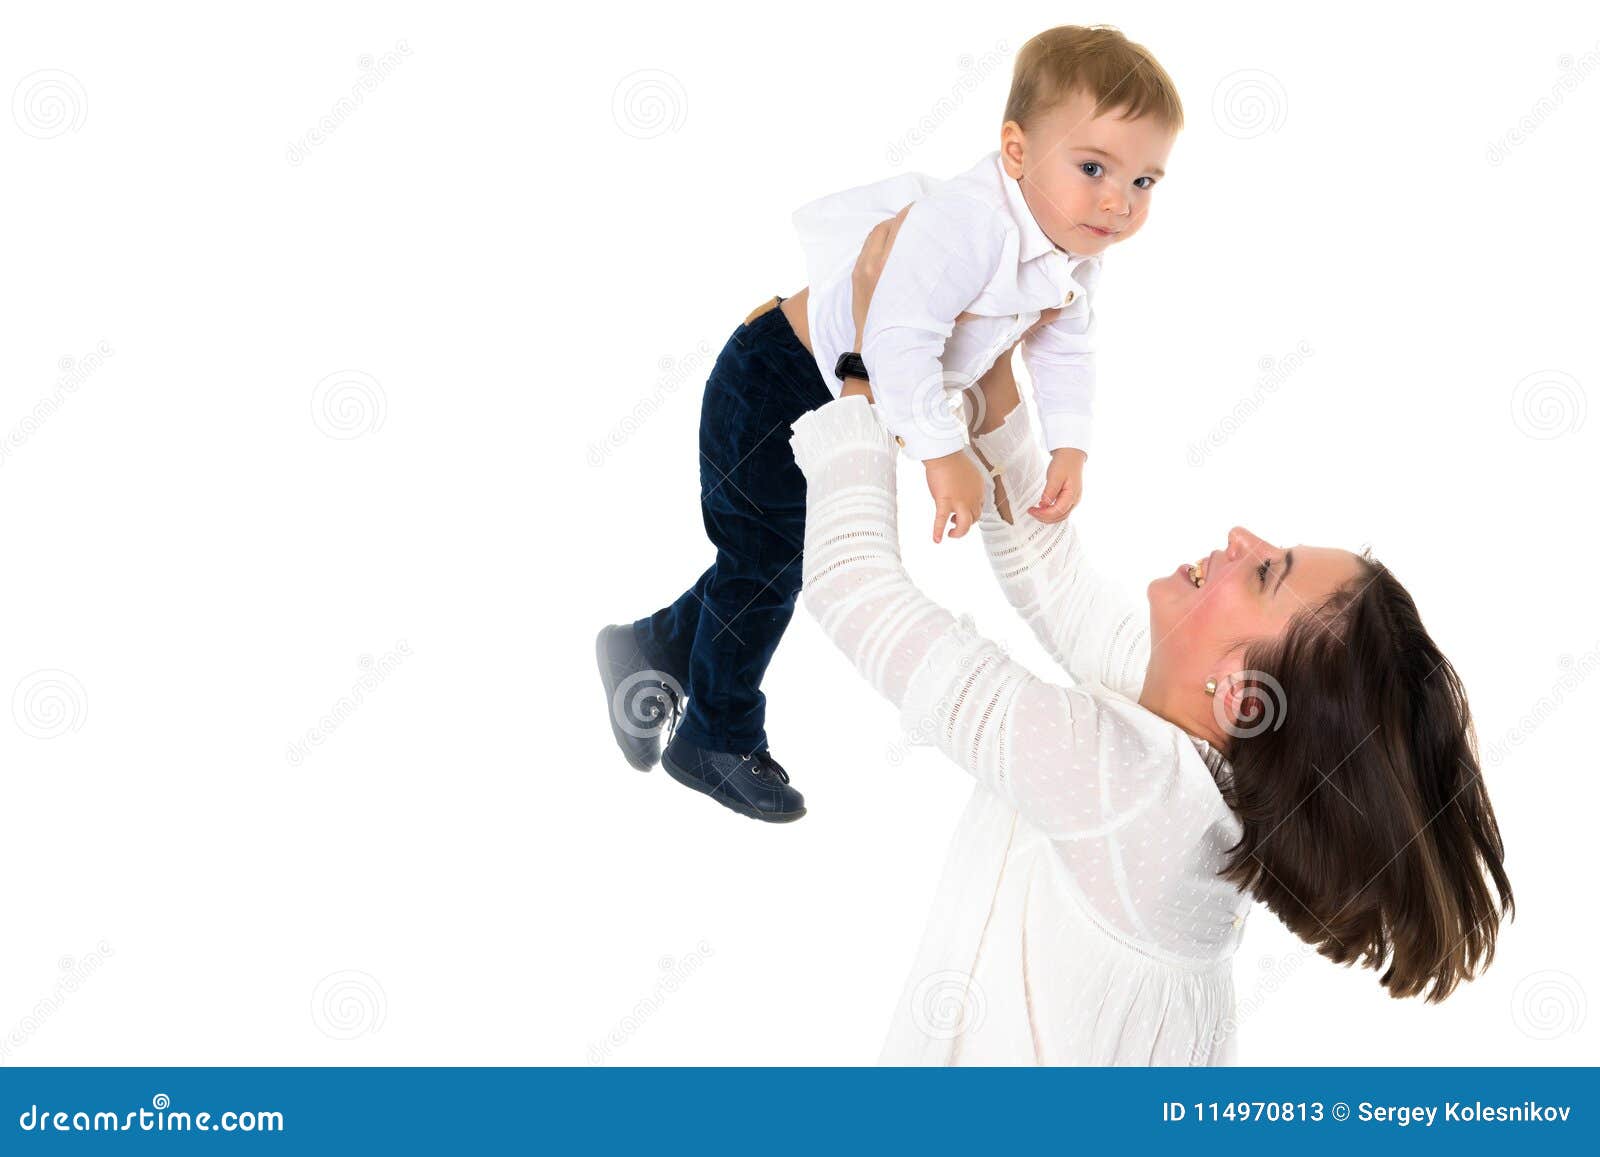 Mom throws her son up. stock image. Image of cute, people - 114970813